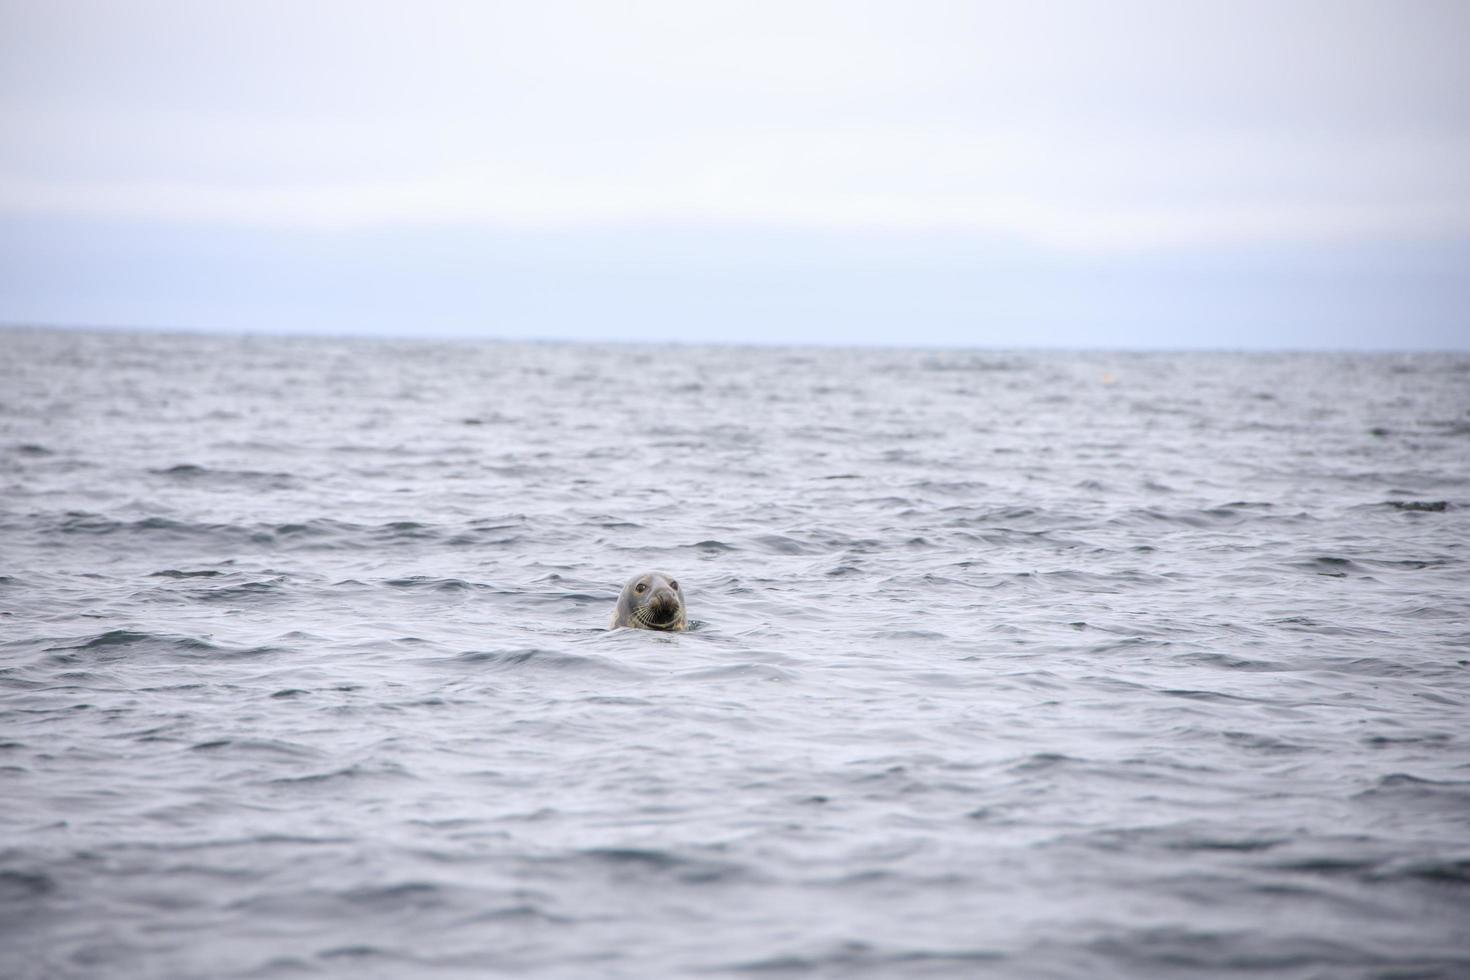 Seal swimming in the waves in the ocean photo